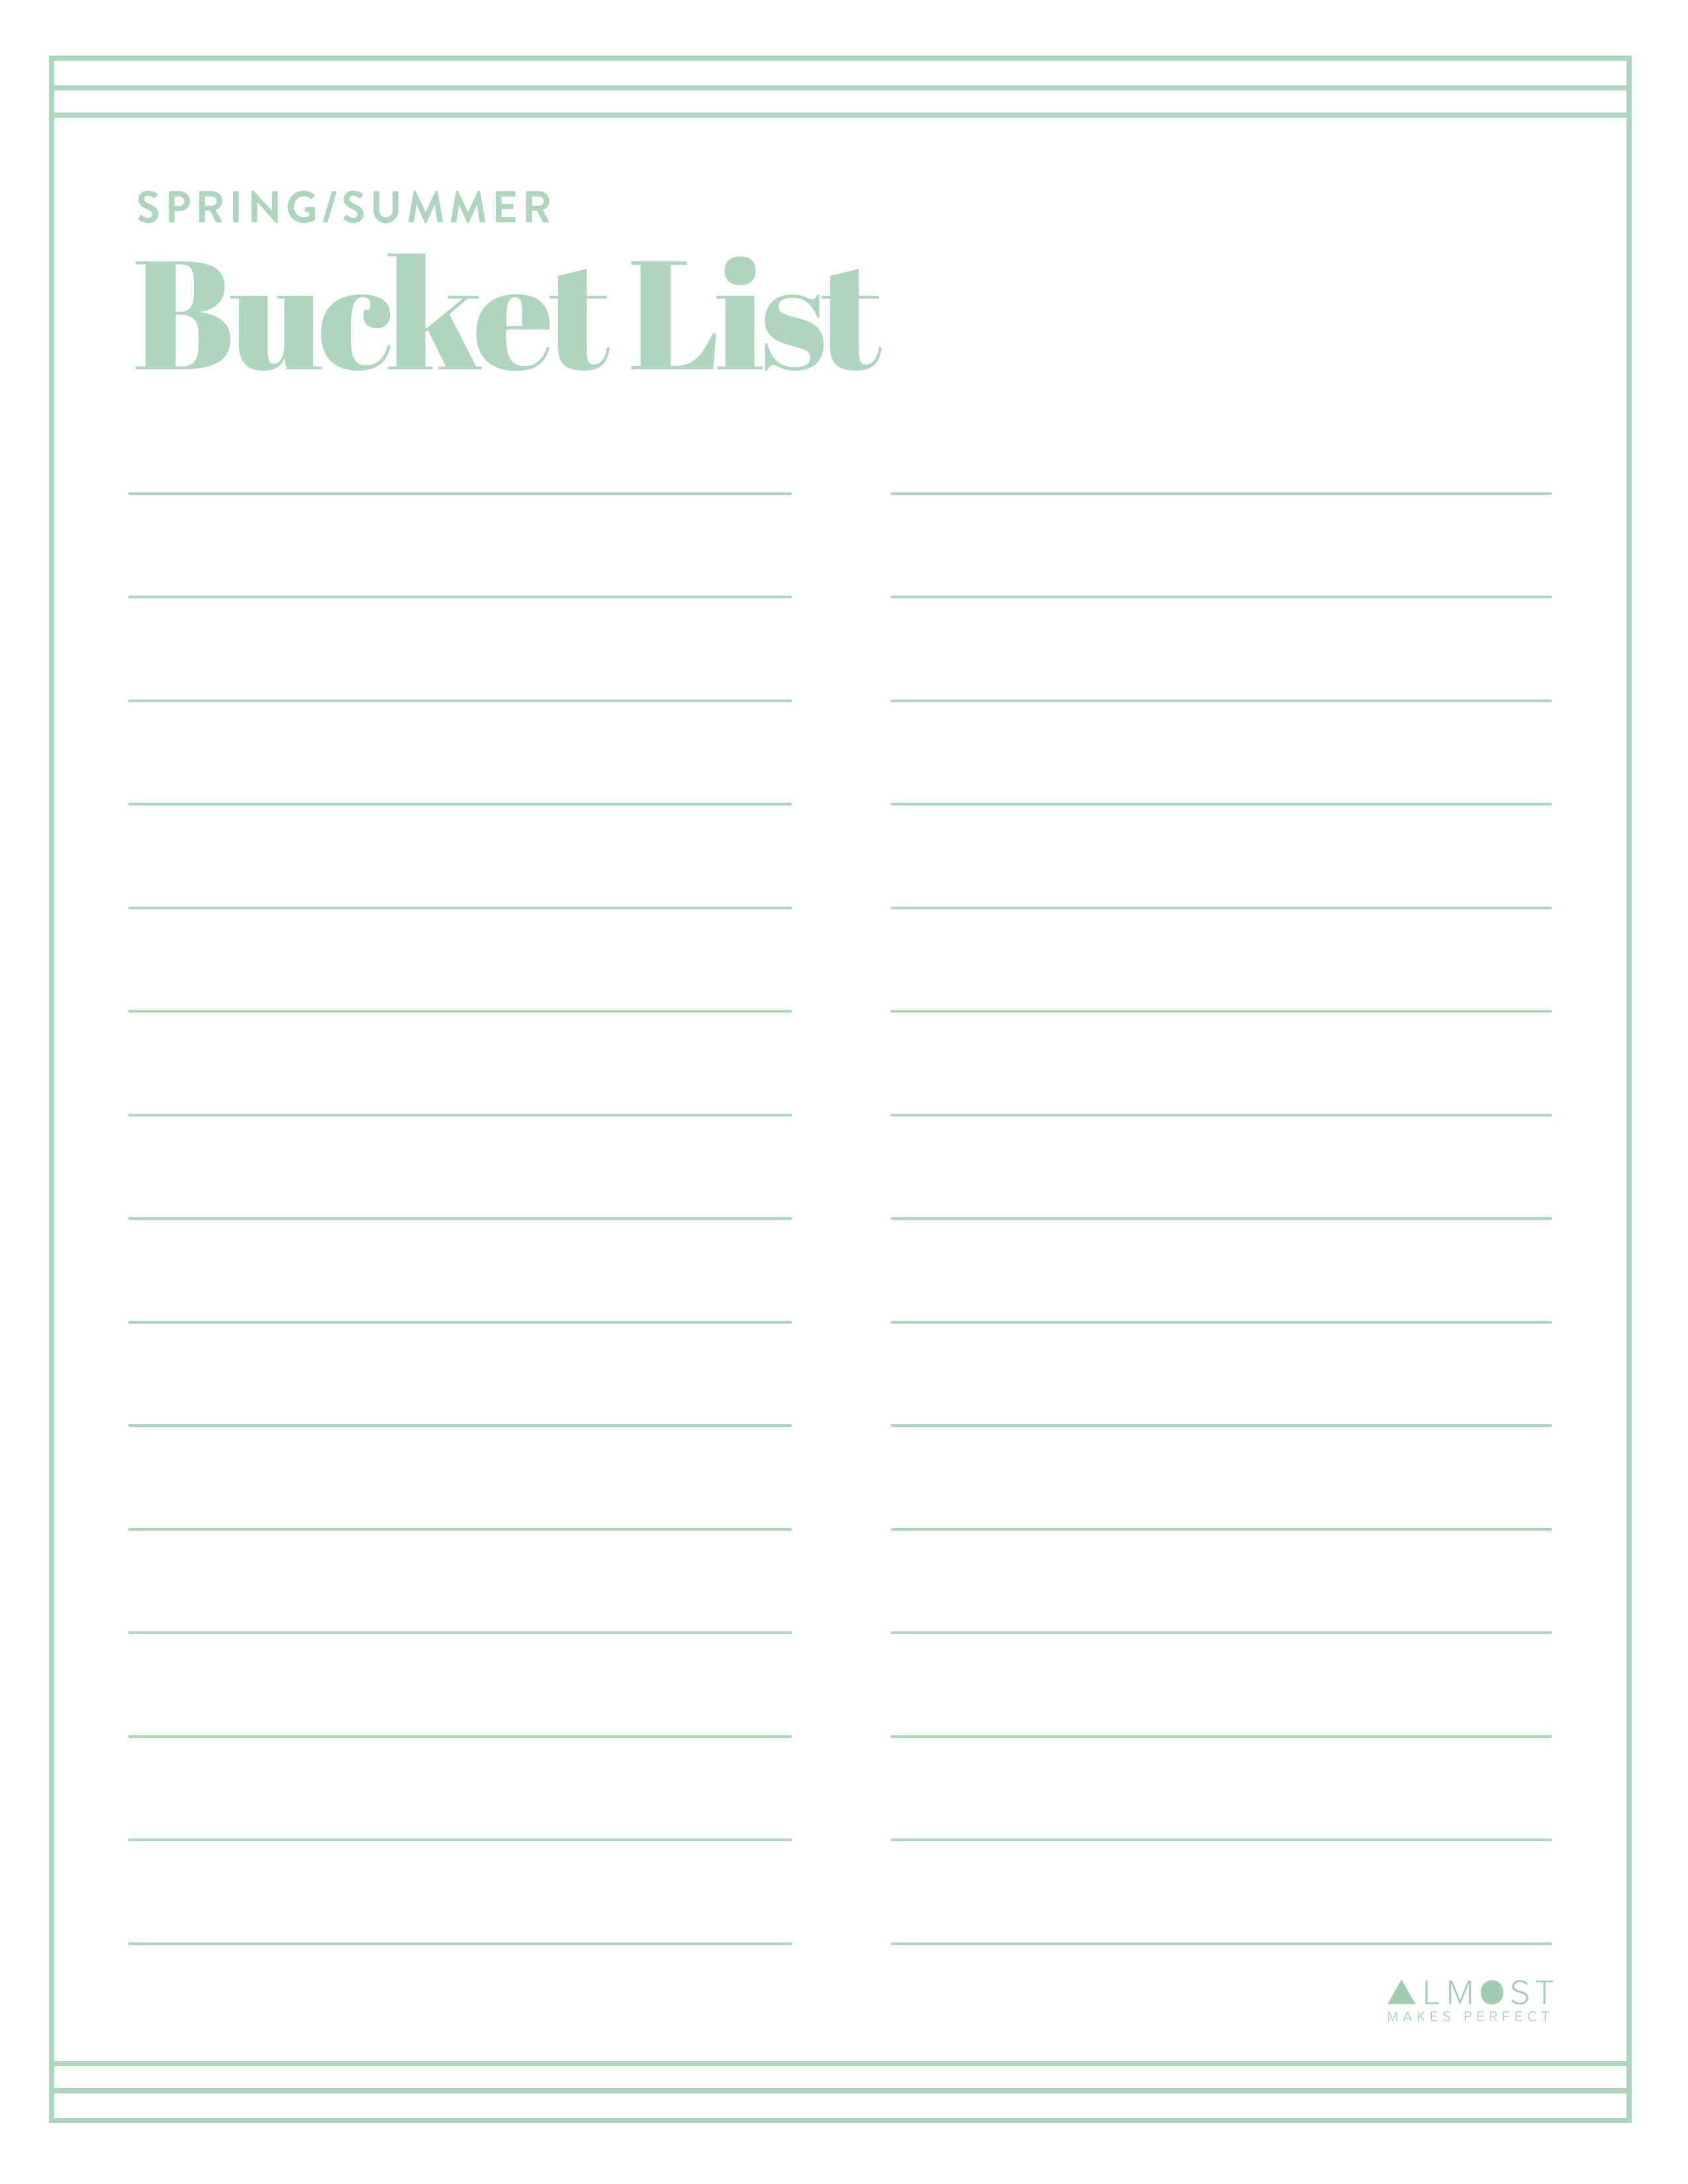 printable-spring-summer-bucket-list-almost-makes-perfect